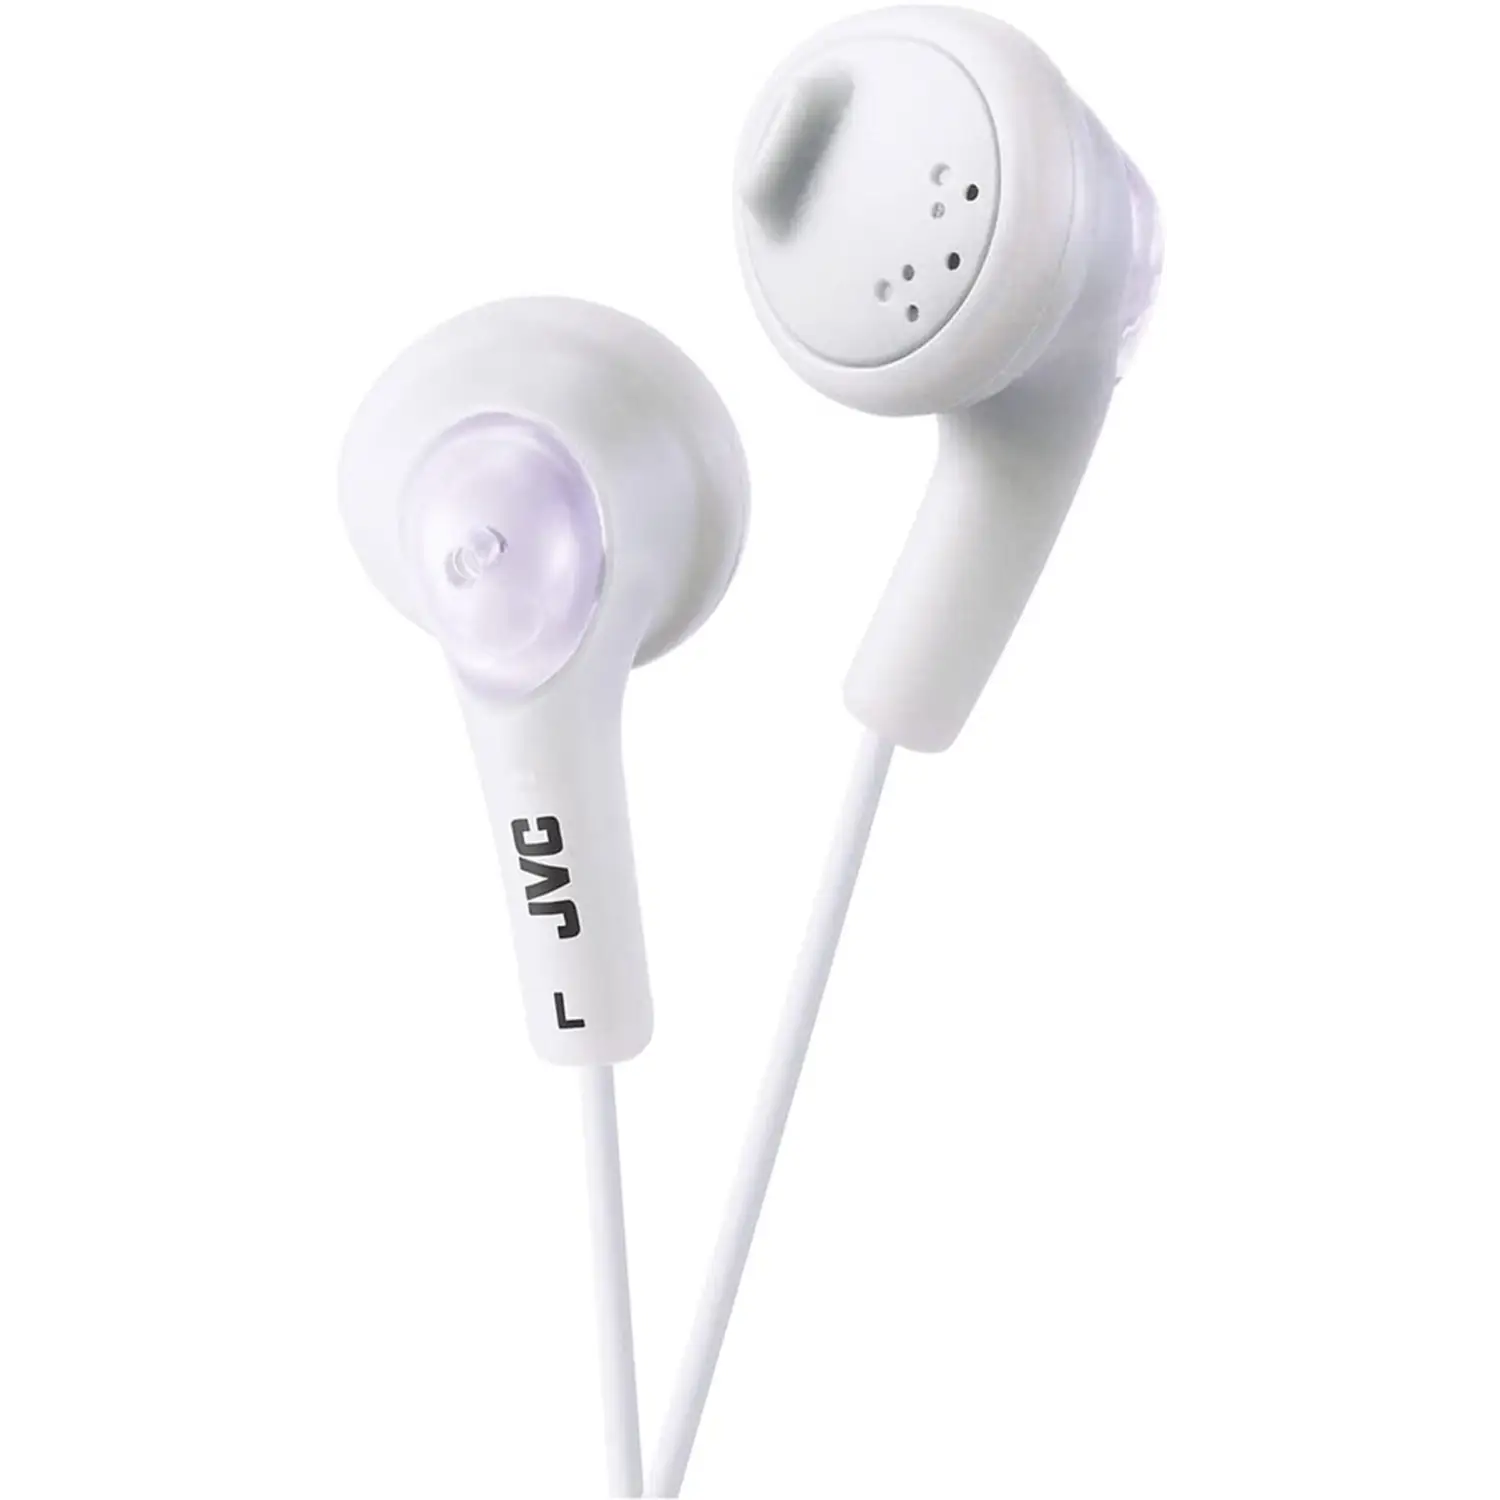 JVC Gumy Bass Boosting iPhone Compatible In-Ear Headphones